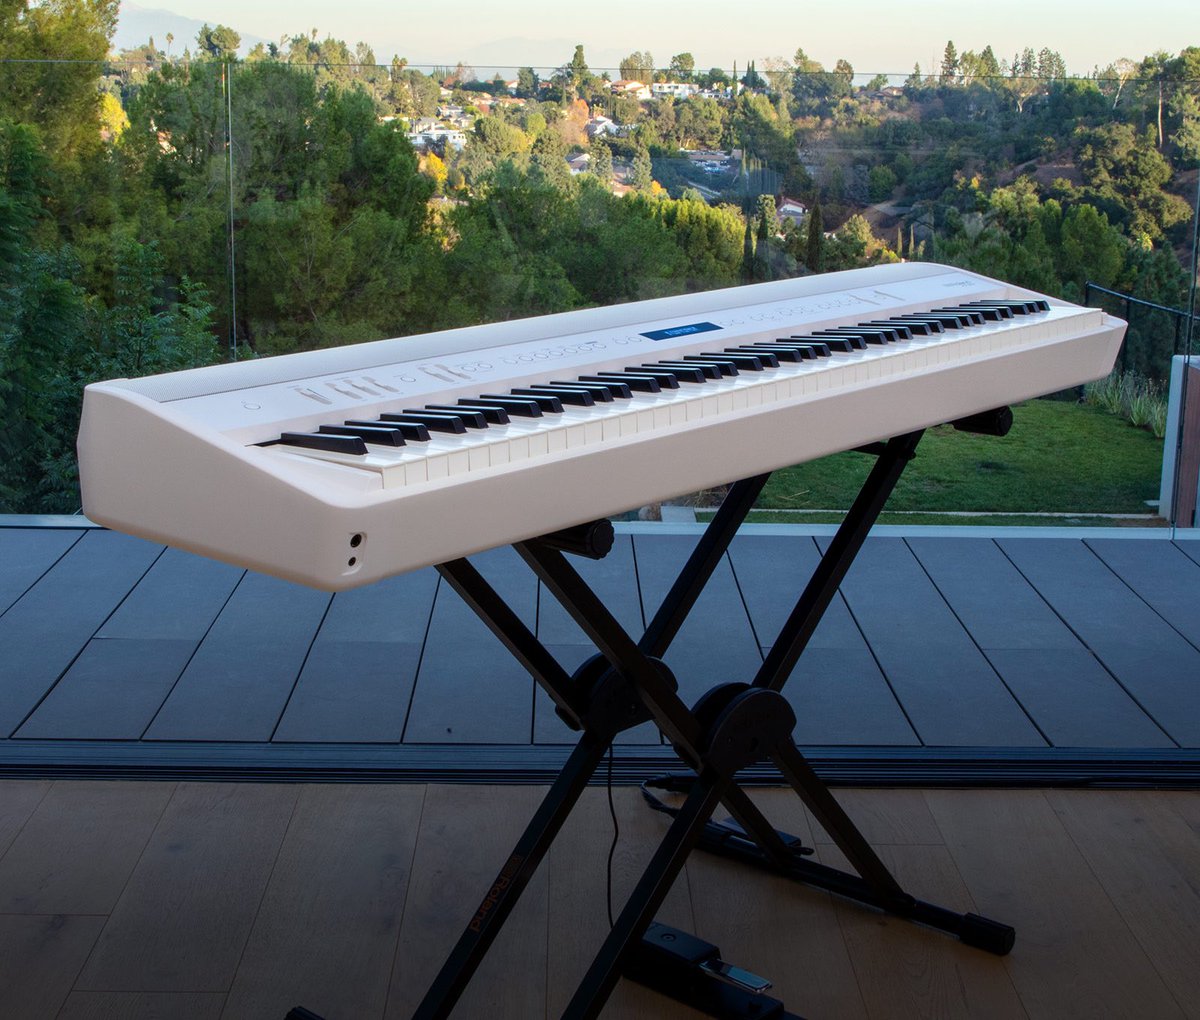 Invest in the flagship FP-90X for the best of @Roland_US! Featuring an endlessly playable PHA-50 #HybridKeyboard, PureAcoustic #PianoModeling that brings your music to life, and a four-speaker system that delivers #PremiumSound: bit.ly/3n5RrnB #JacobsMusicCompany #FP90X